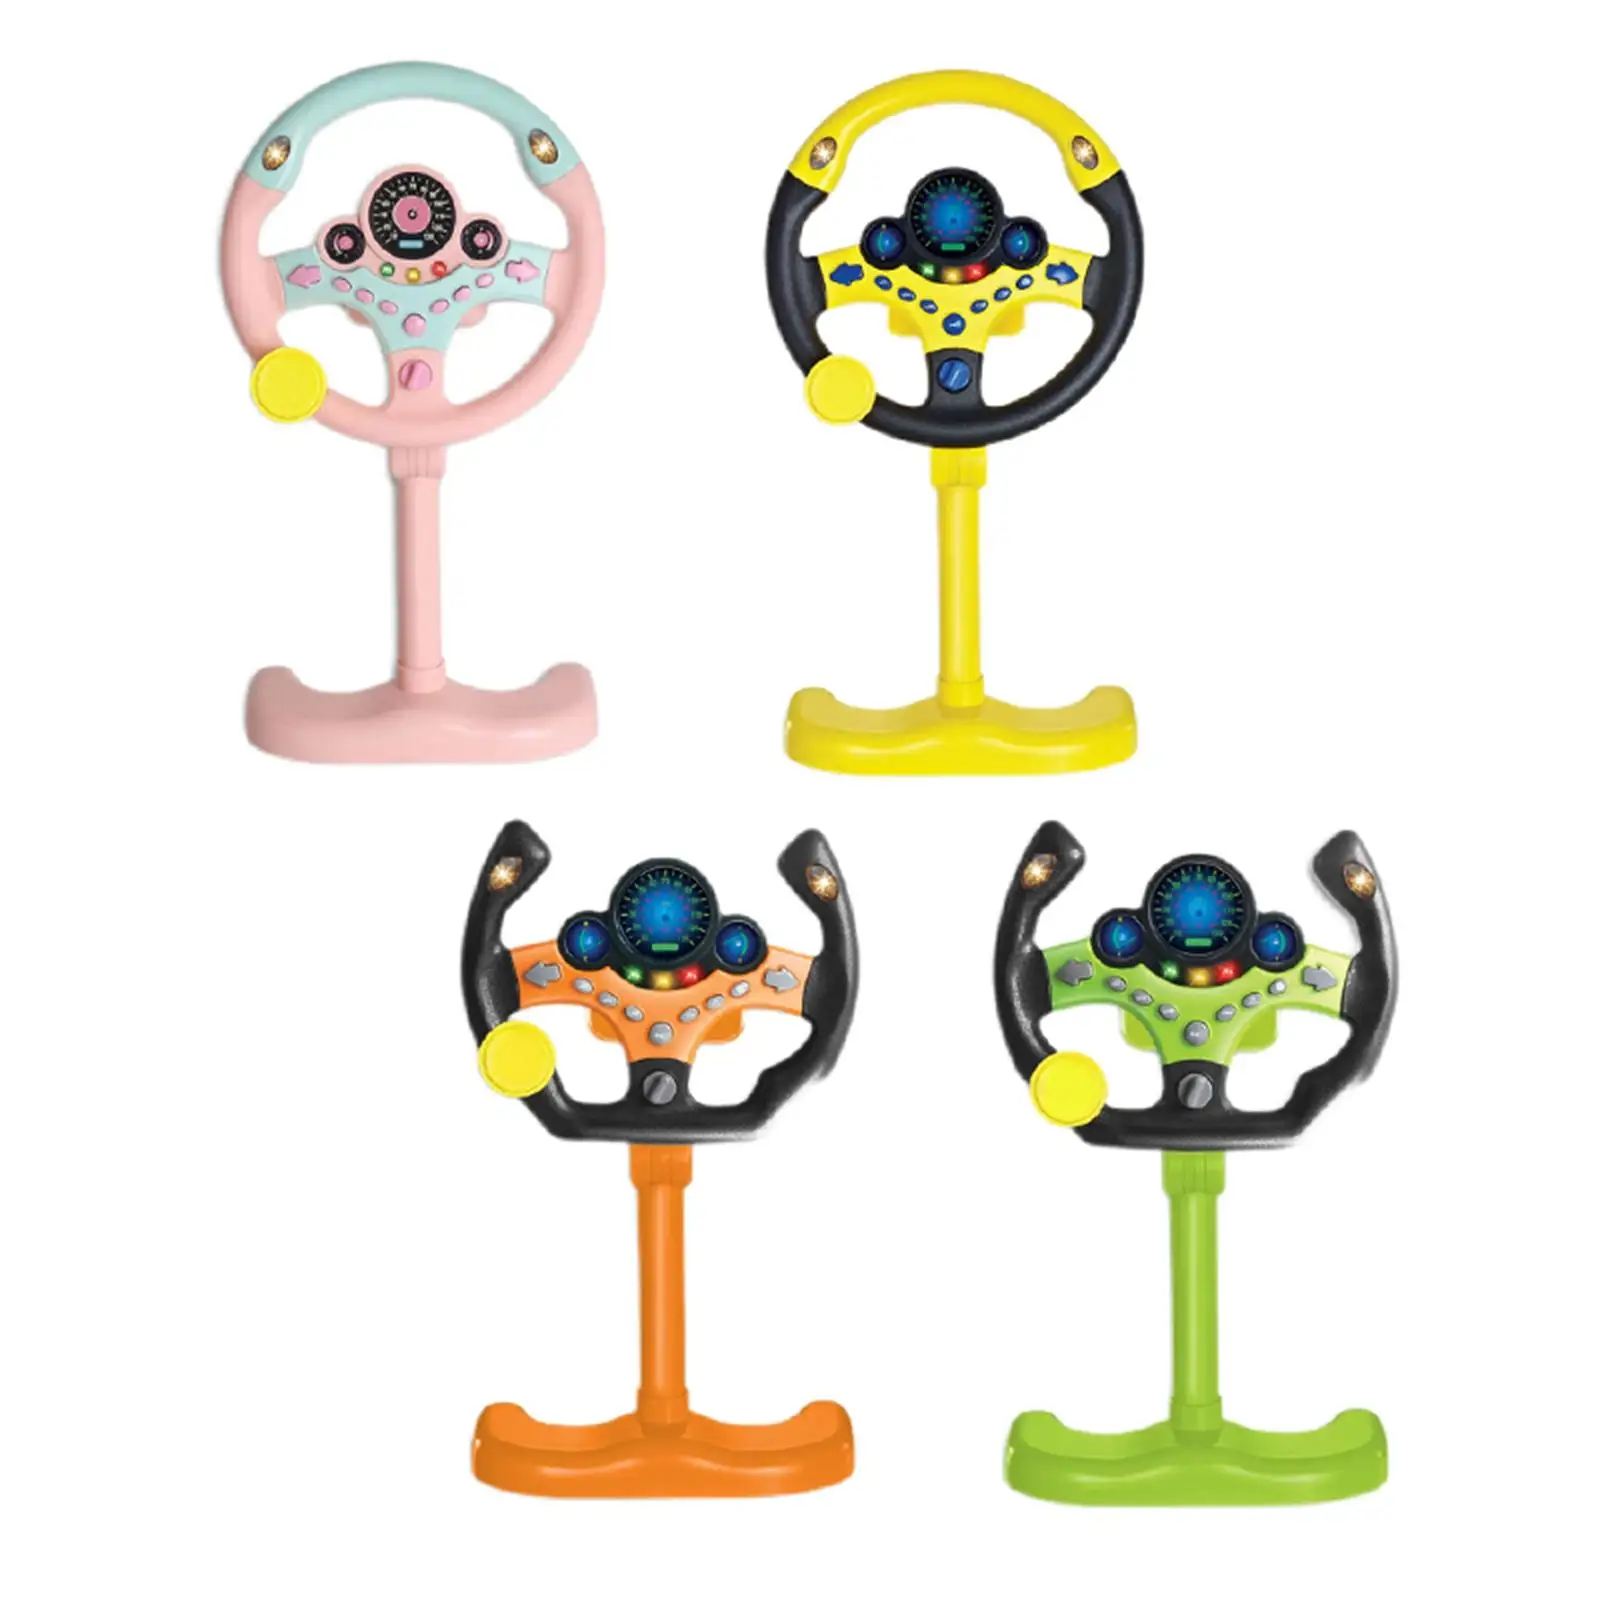 simulated-steering-wheel-for-kids-w-light-muic-sounding-toy-interactive-copilot-electric-baby-gift